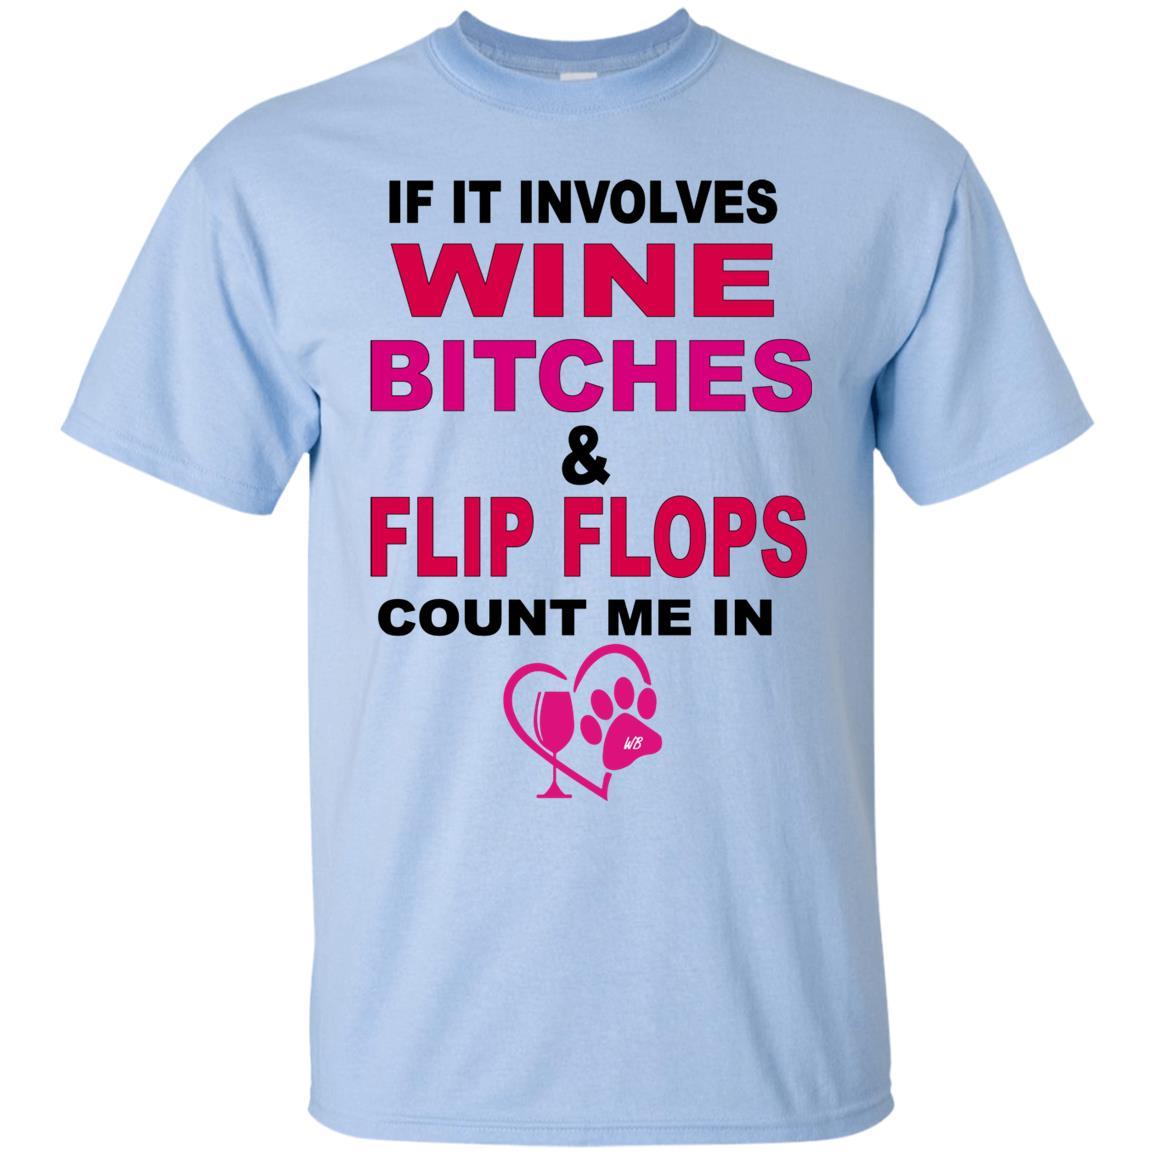 T-Shirts Light Blue / S WineyBitches.co " If It Involves Wine Bitches & Flip Flops I'm In" Ultra Cotton Unisex T-Shirt WineyBitches.co Hilariously Funny T-Shirt for Wine & Dog Lovers   WineyBitchesCo